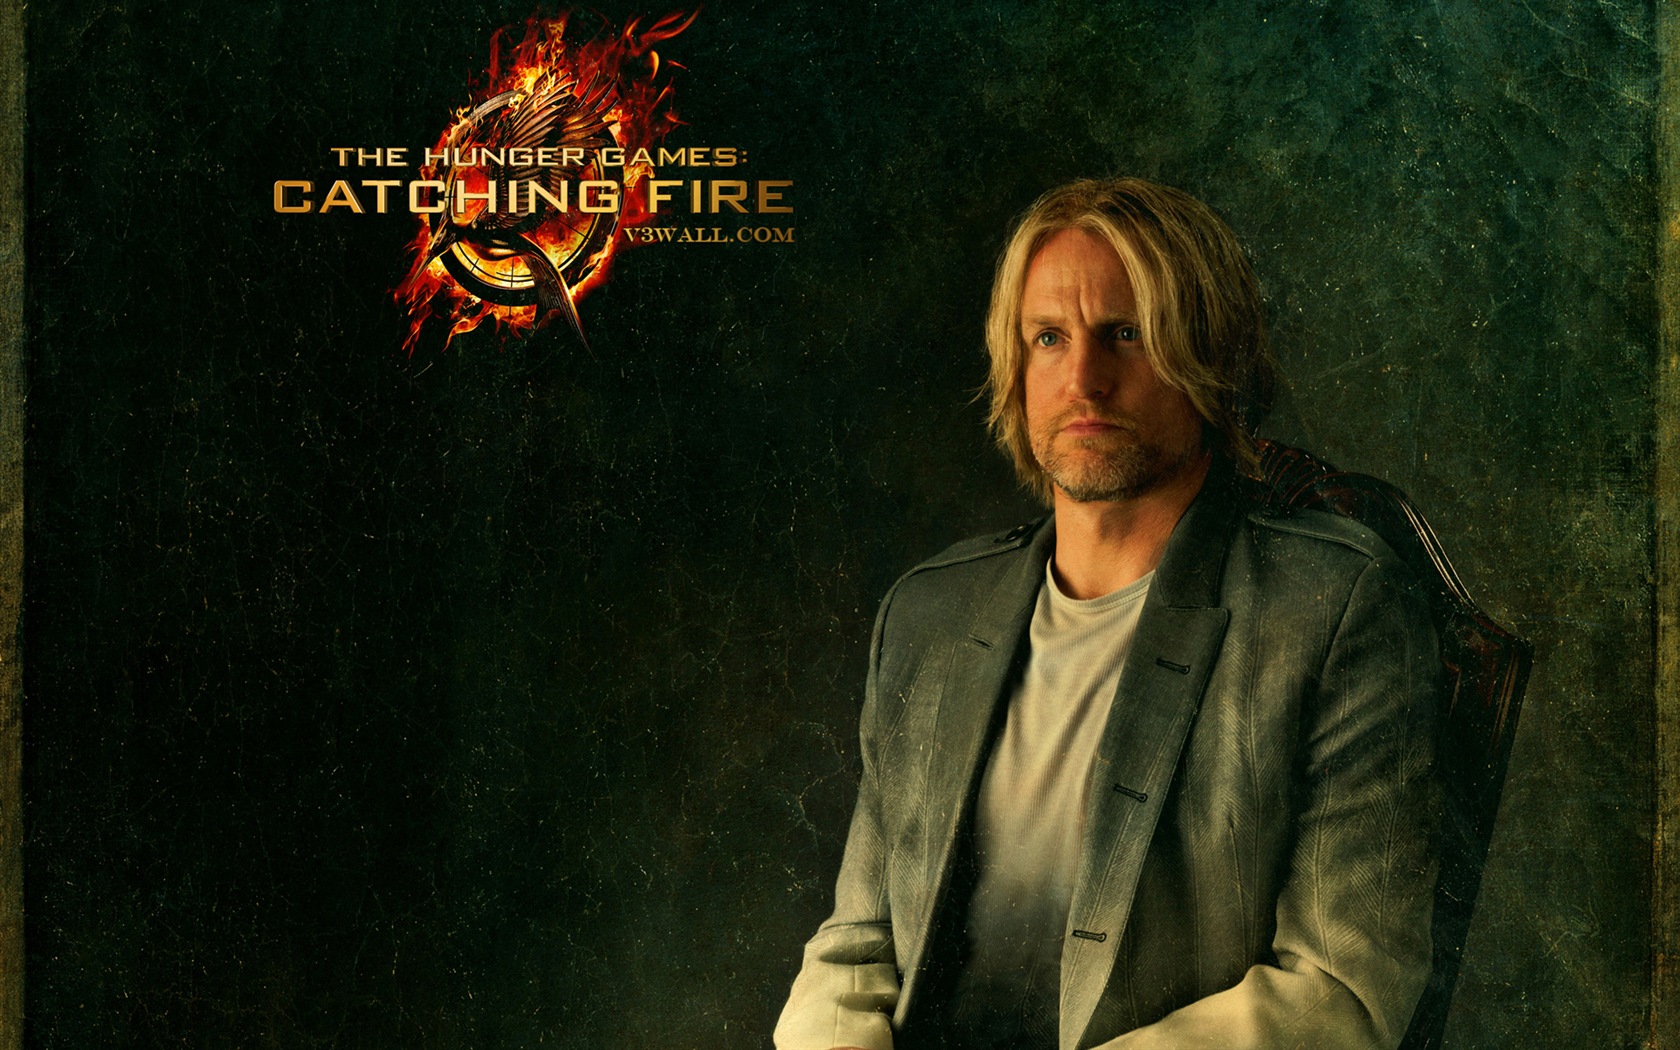 The Hunger Games: Catching Fire wallpapers HD #12 - 1680x1050